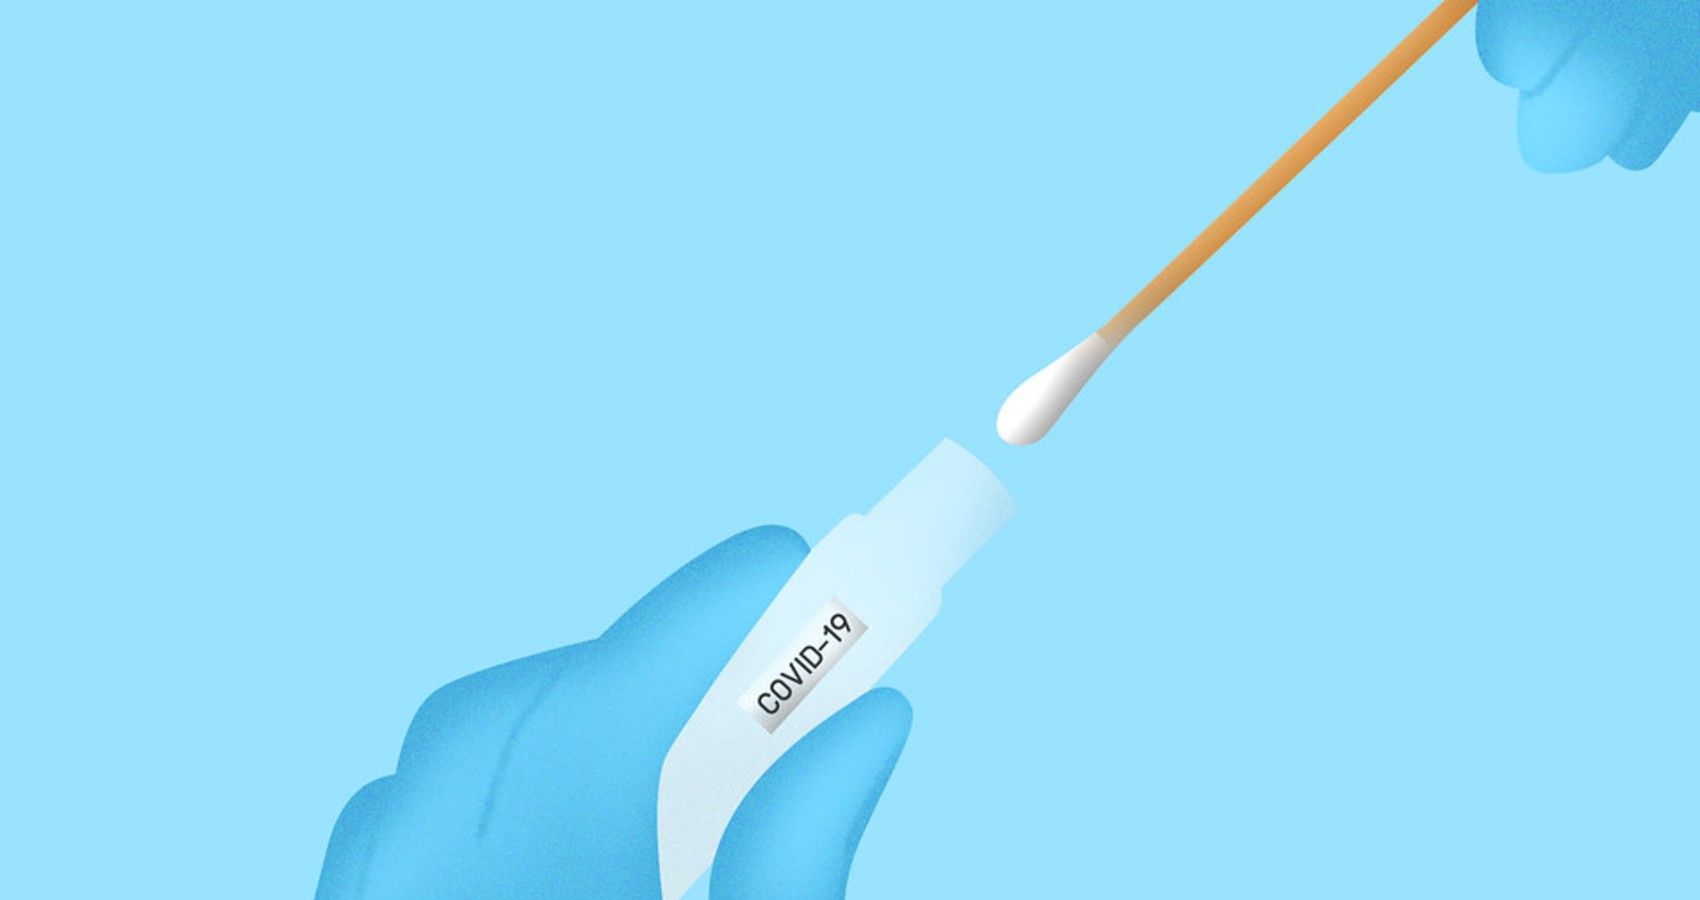 A cartoon depiction of the covid-19 nasal swab test